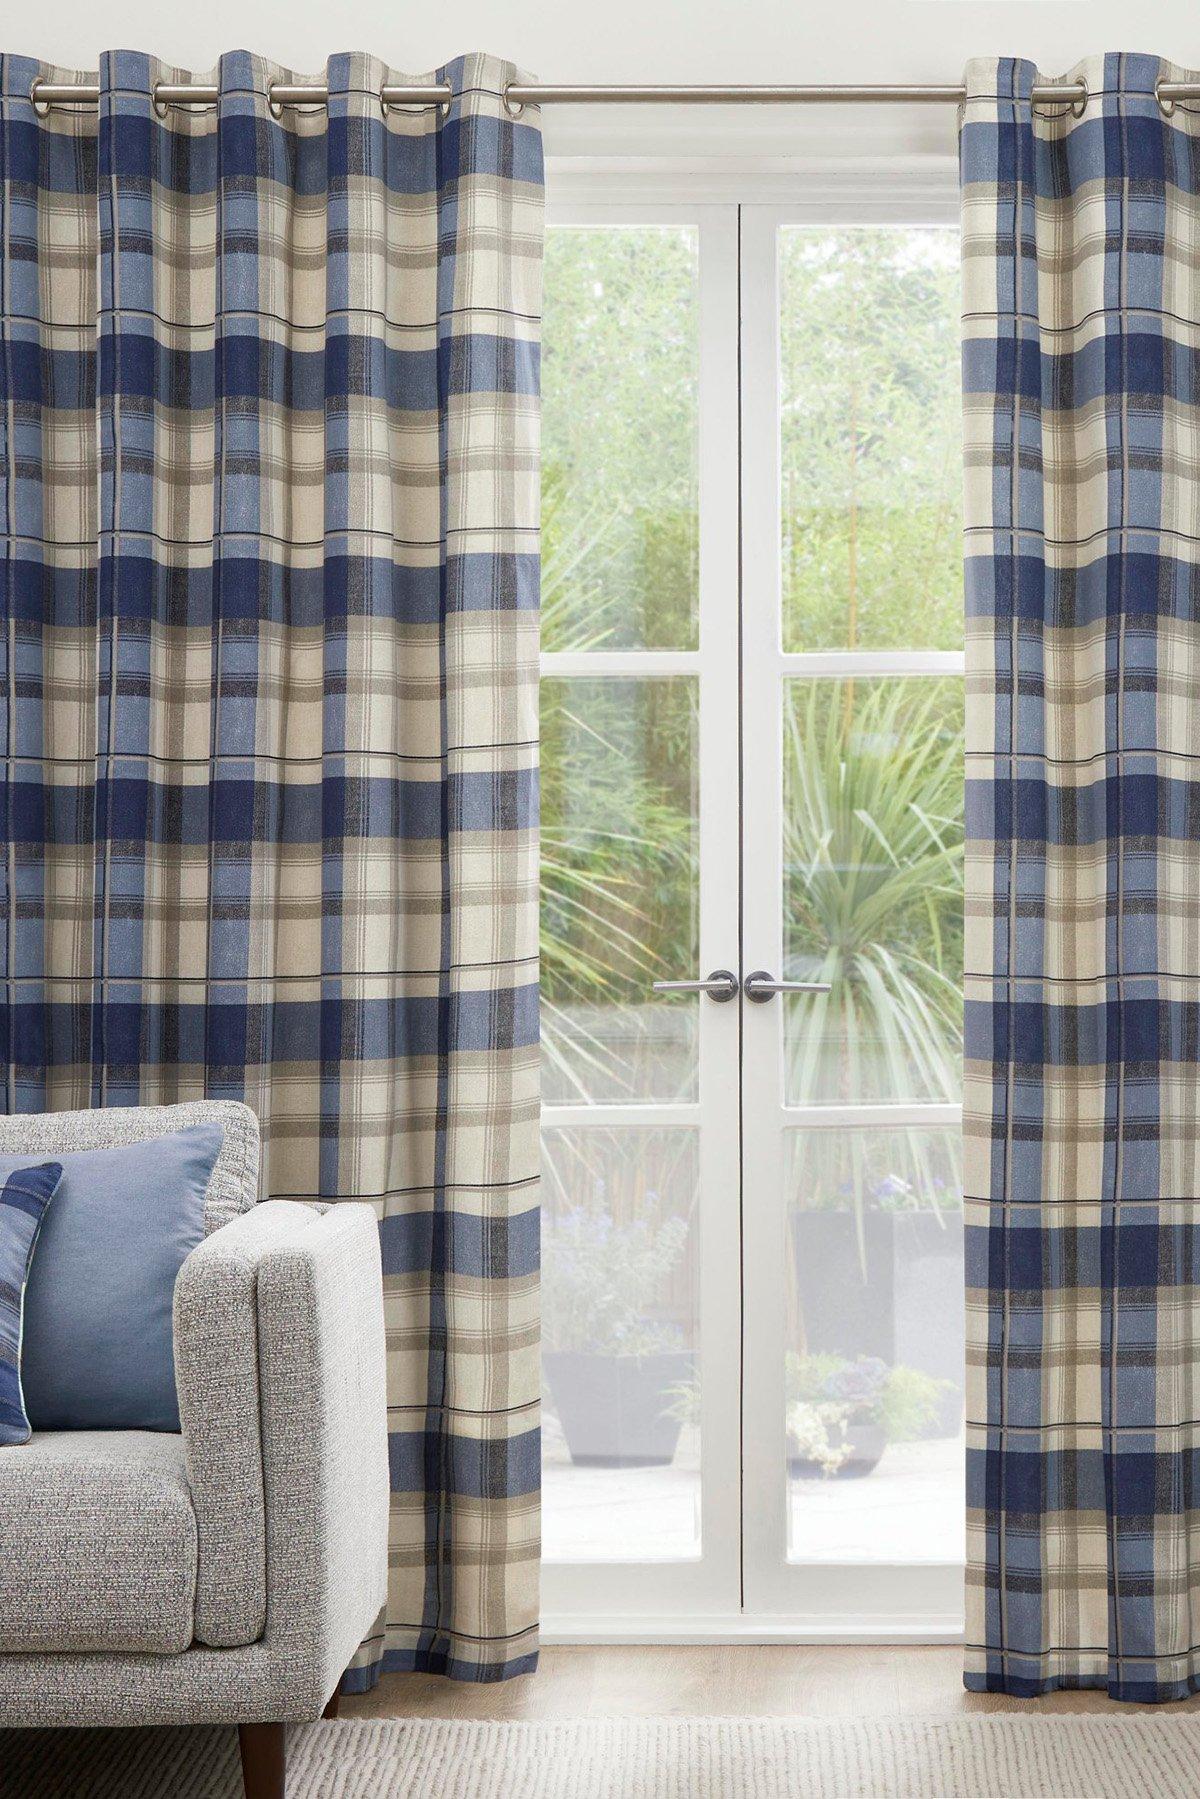 'Balmoral Check' Country Checked Pattern Pair of Eyelet Curtains